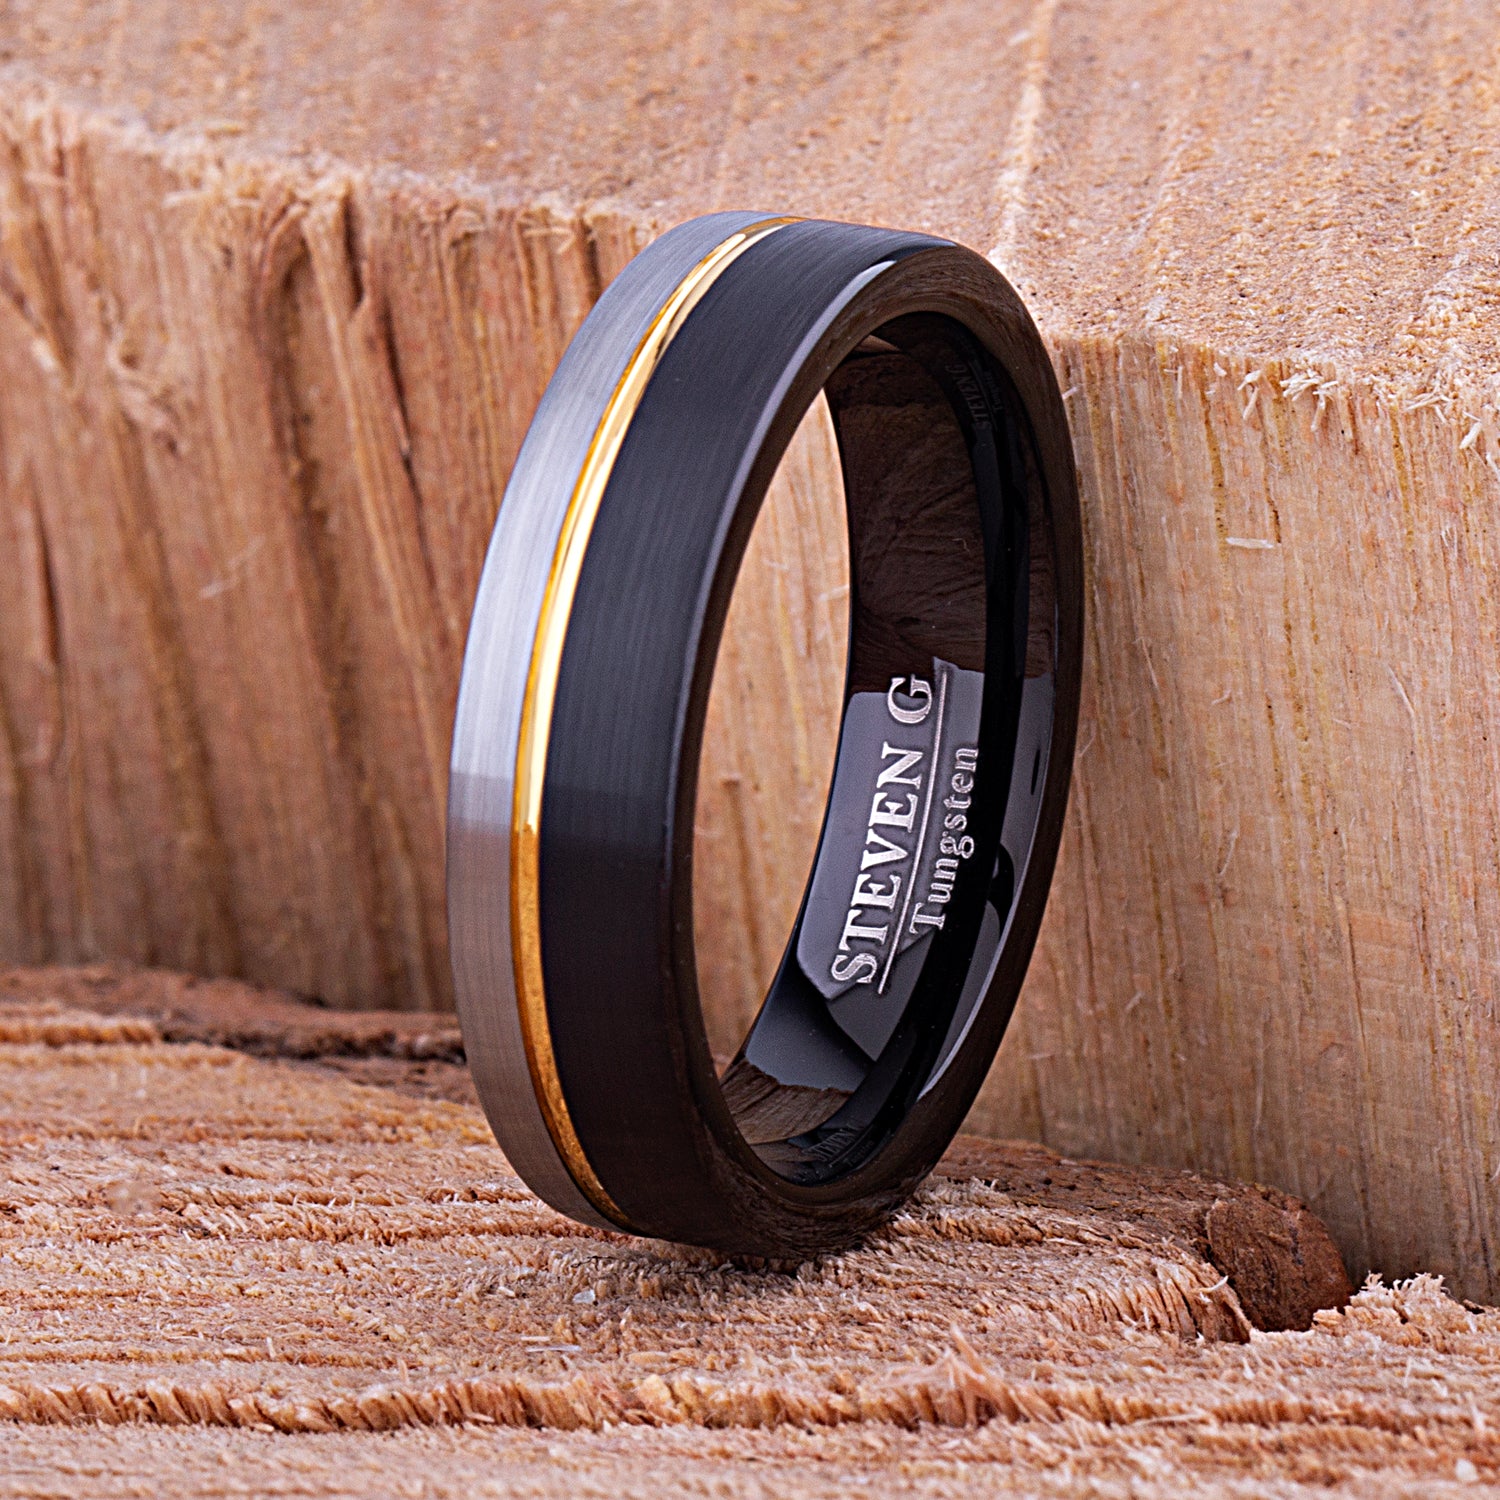 MEN'S STERLING SILVER AND YELLOW GOLD FASHION RING WITH BLACK ONYX -  Howard's Jewelry Center